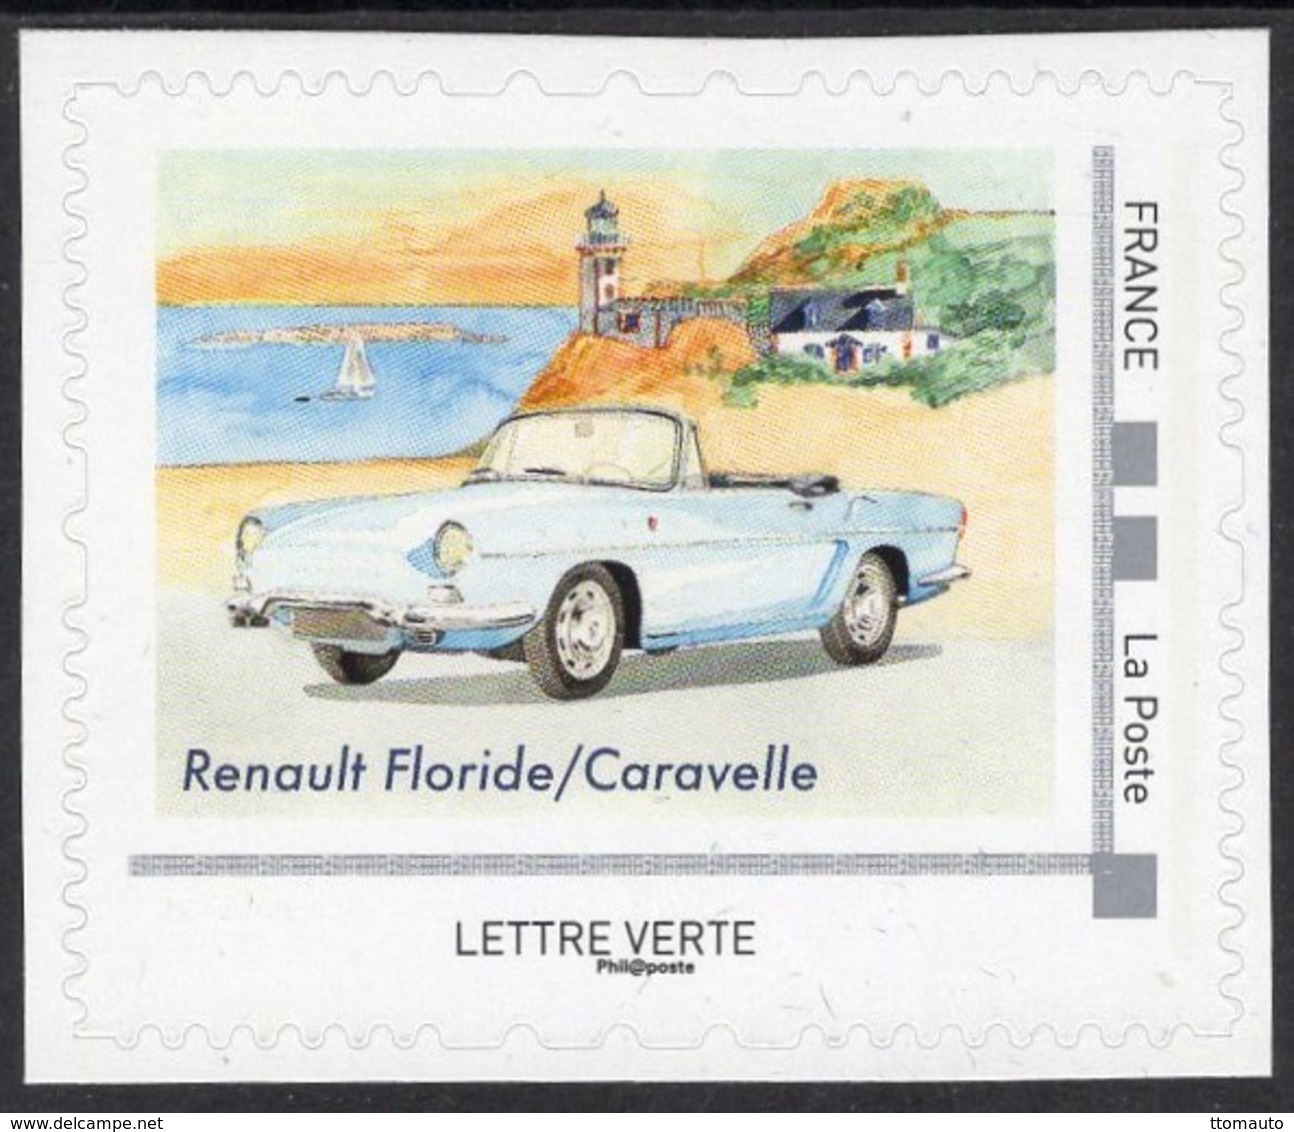 France 2019  -  Renault Floride/Caravelle  -   1v  Timbre Neuf/Mint/MNH - Cars